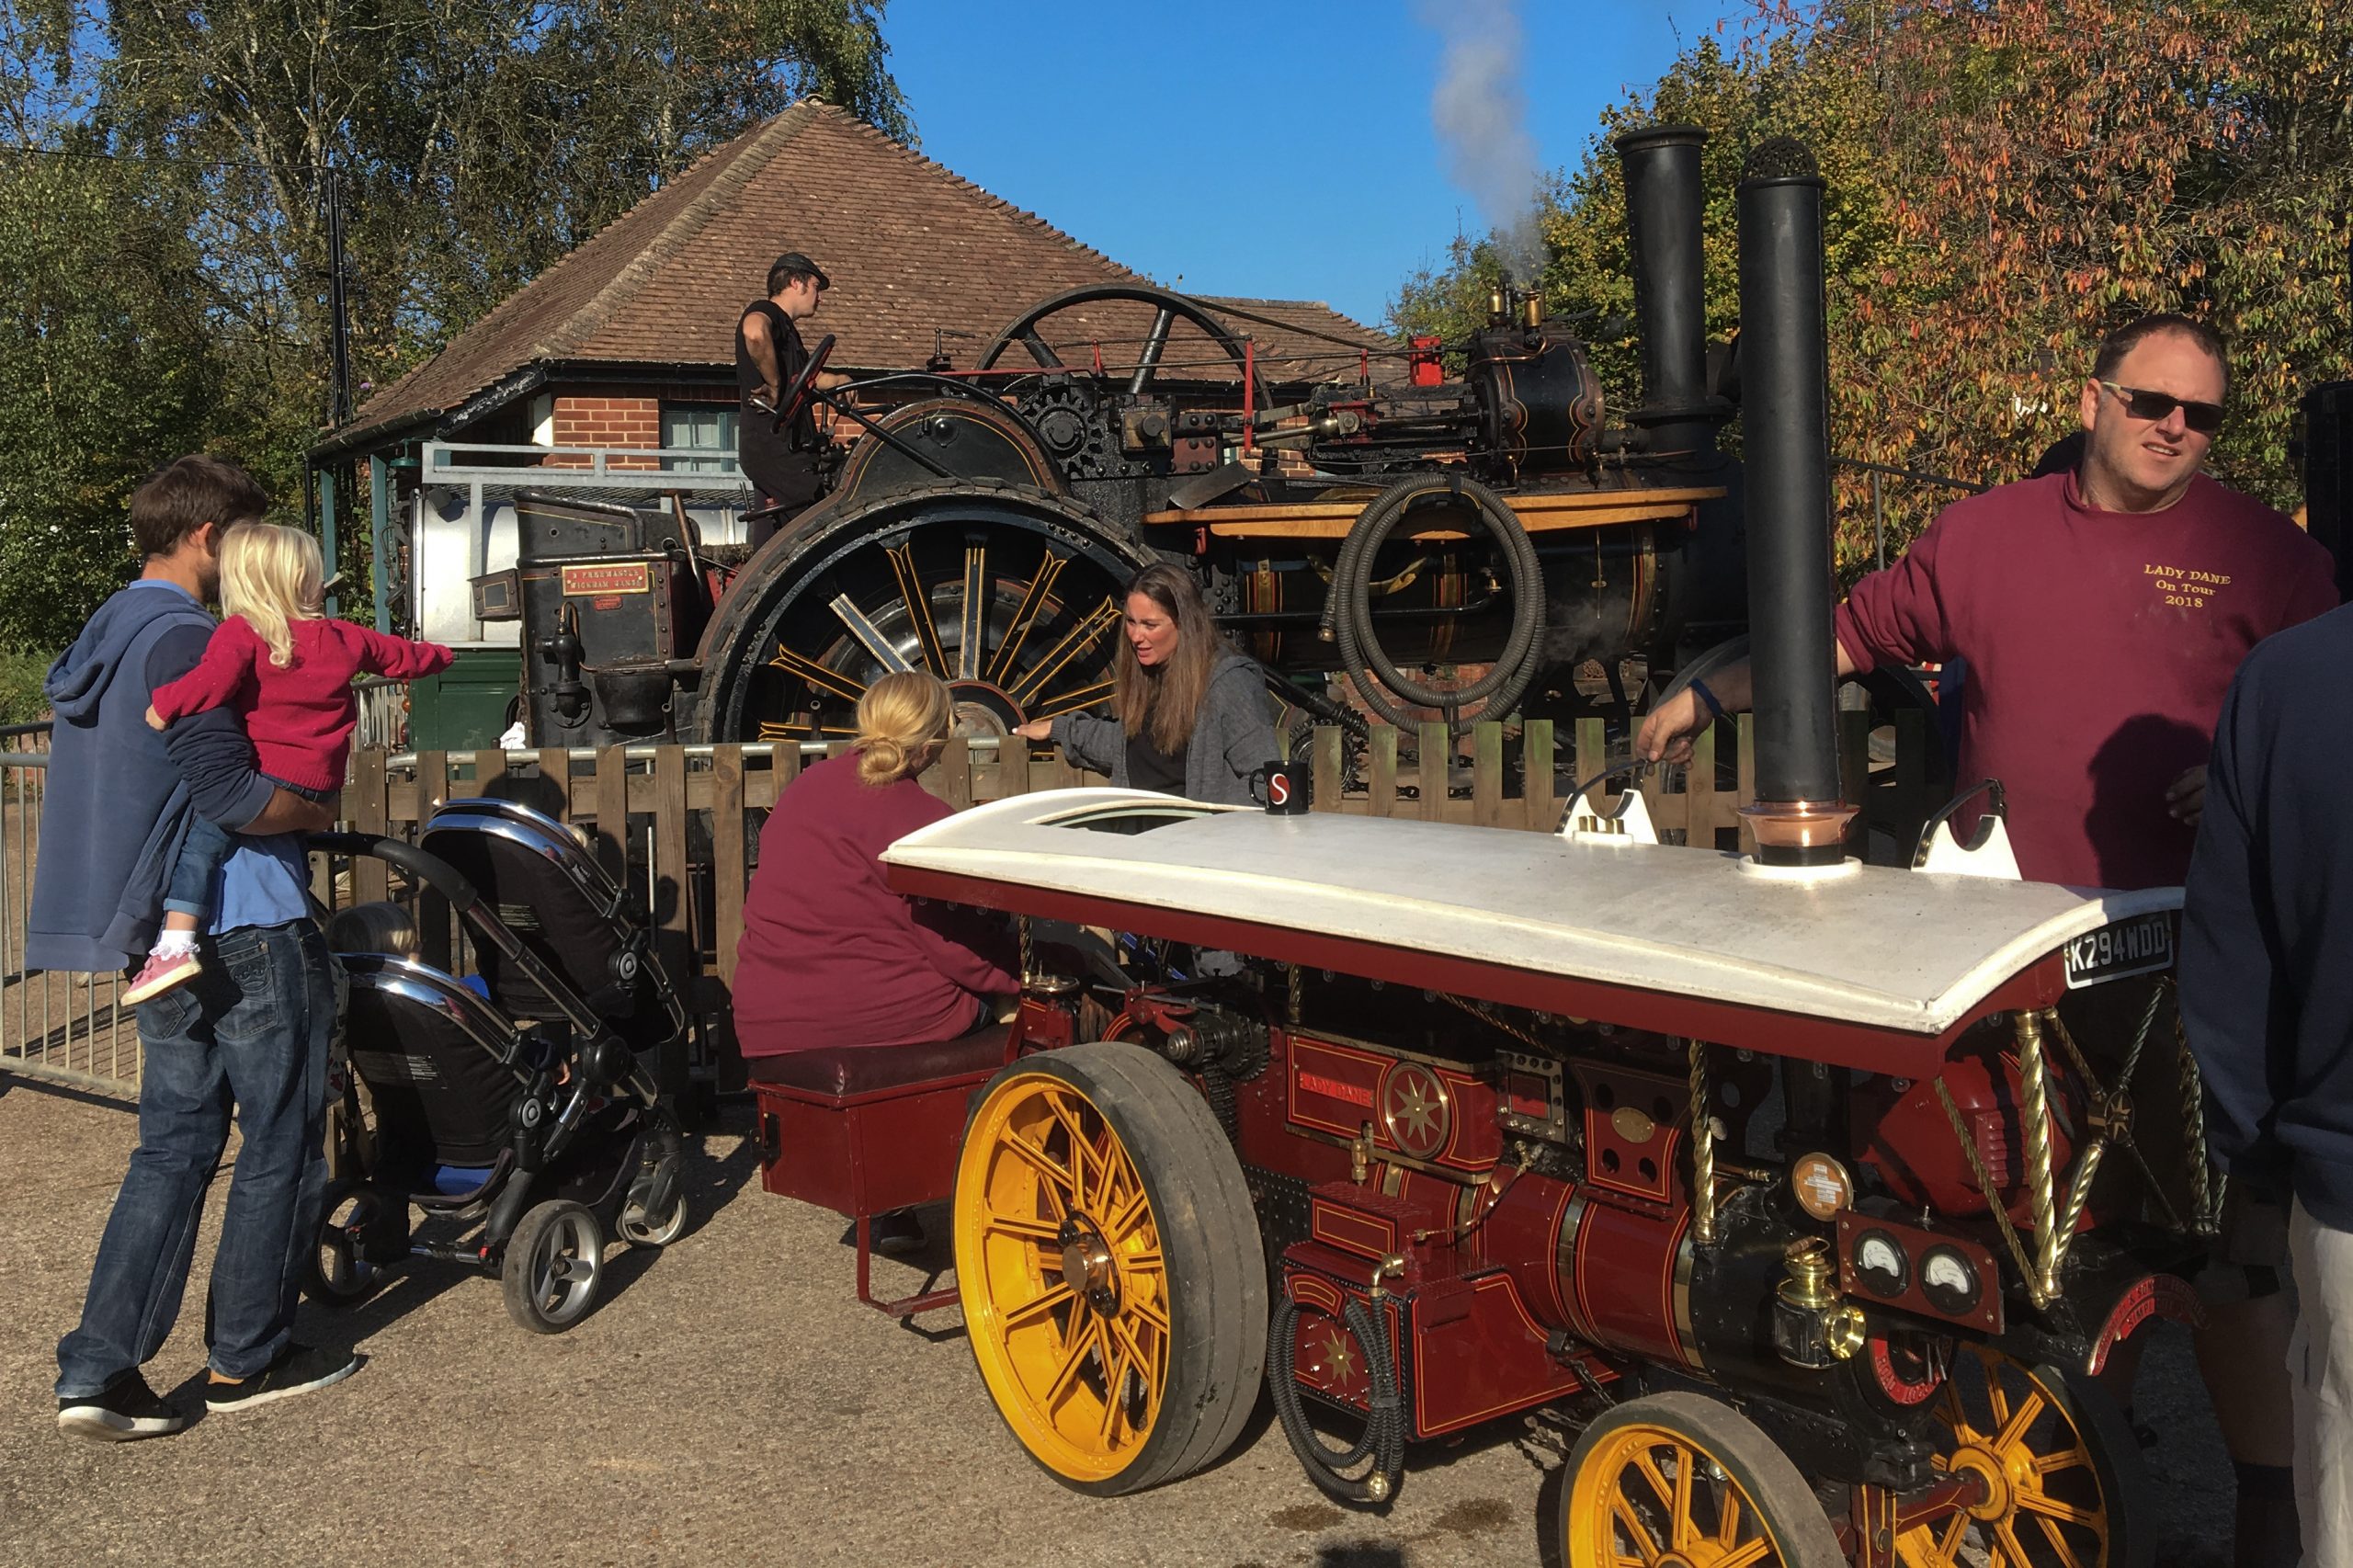 Steam up at The Brickworks Museum